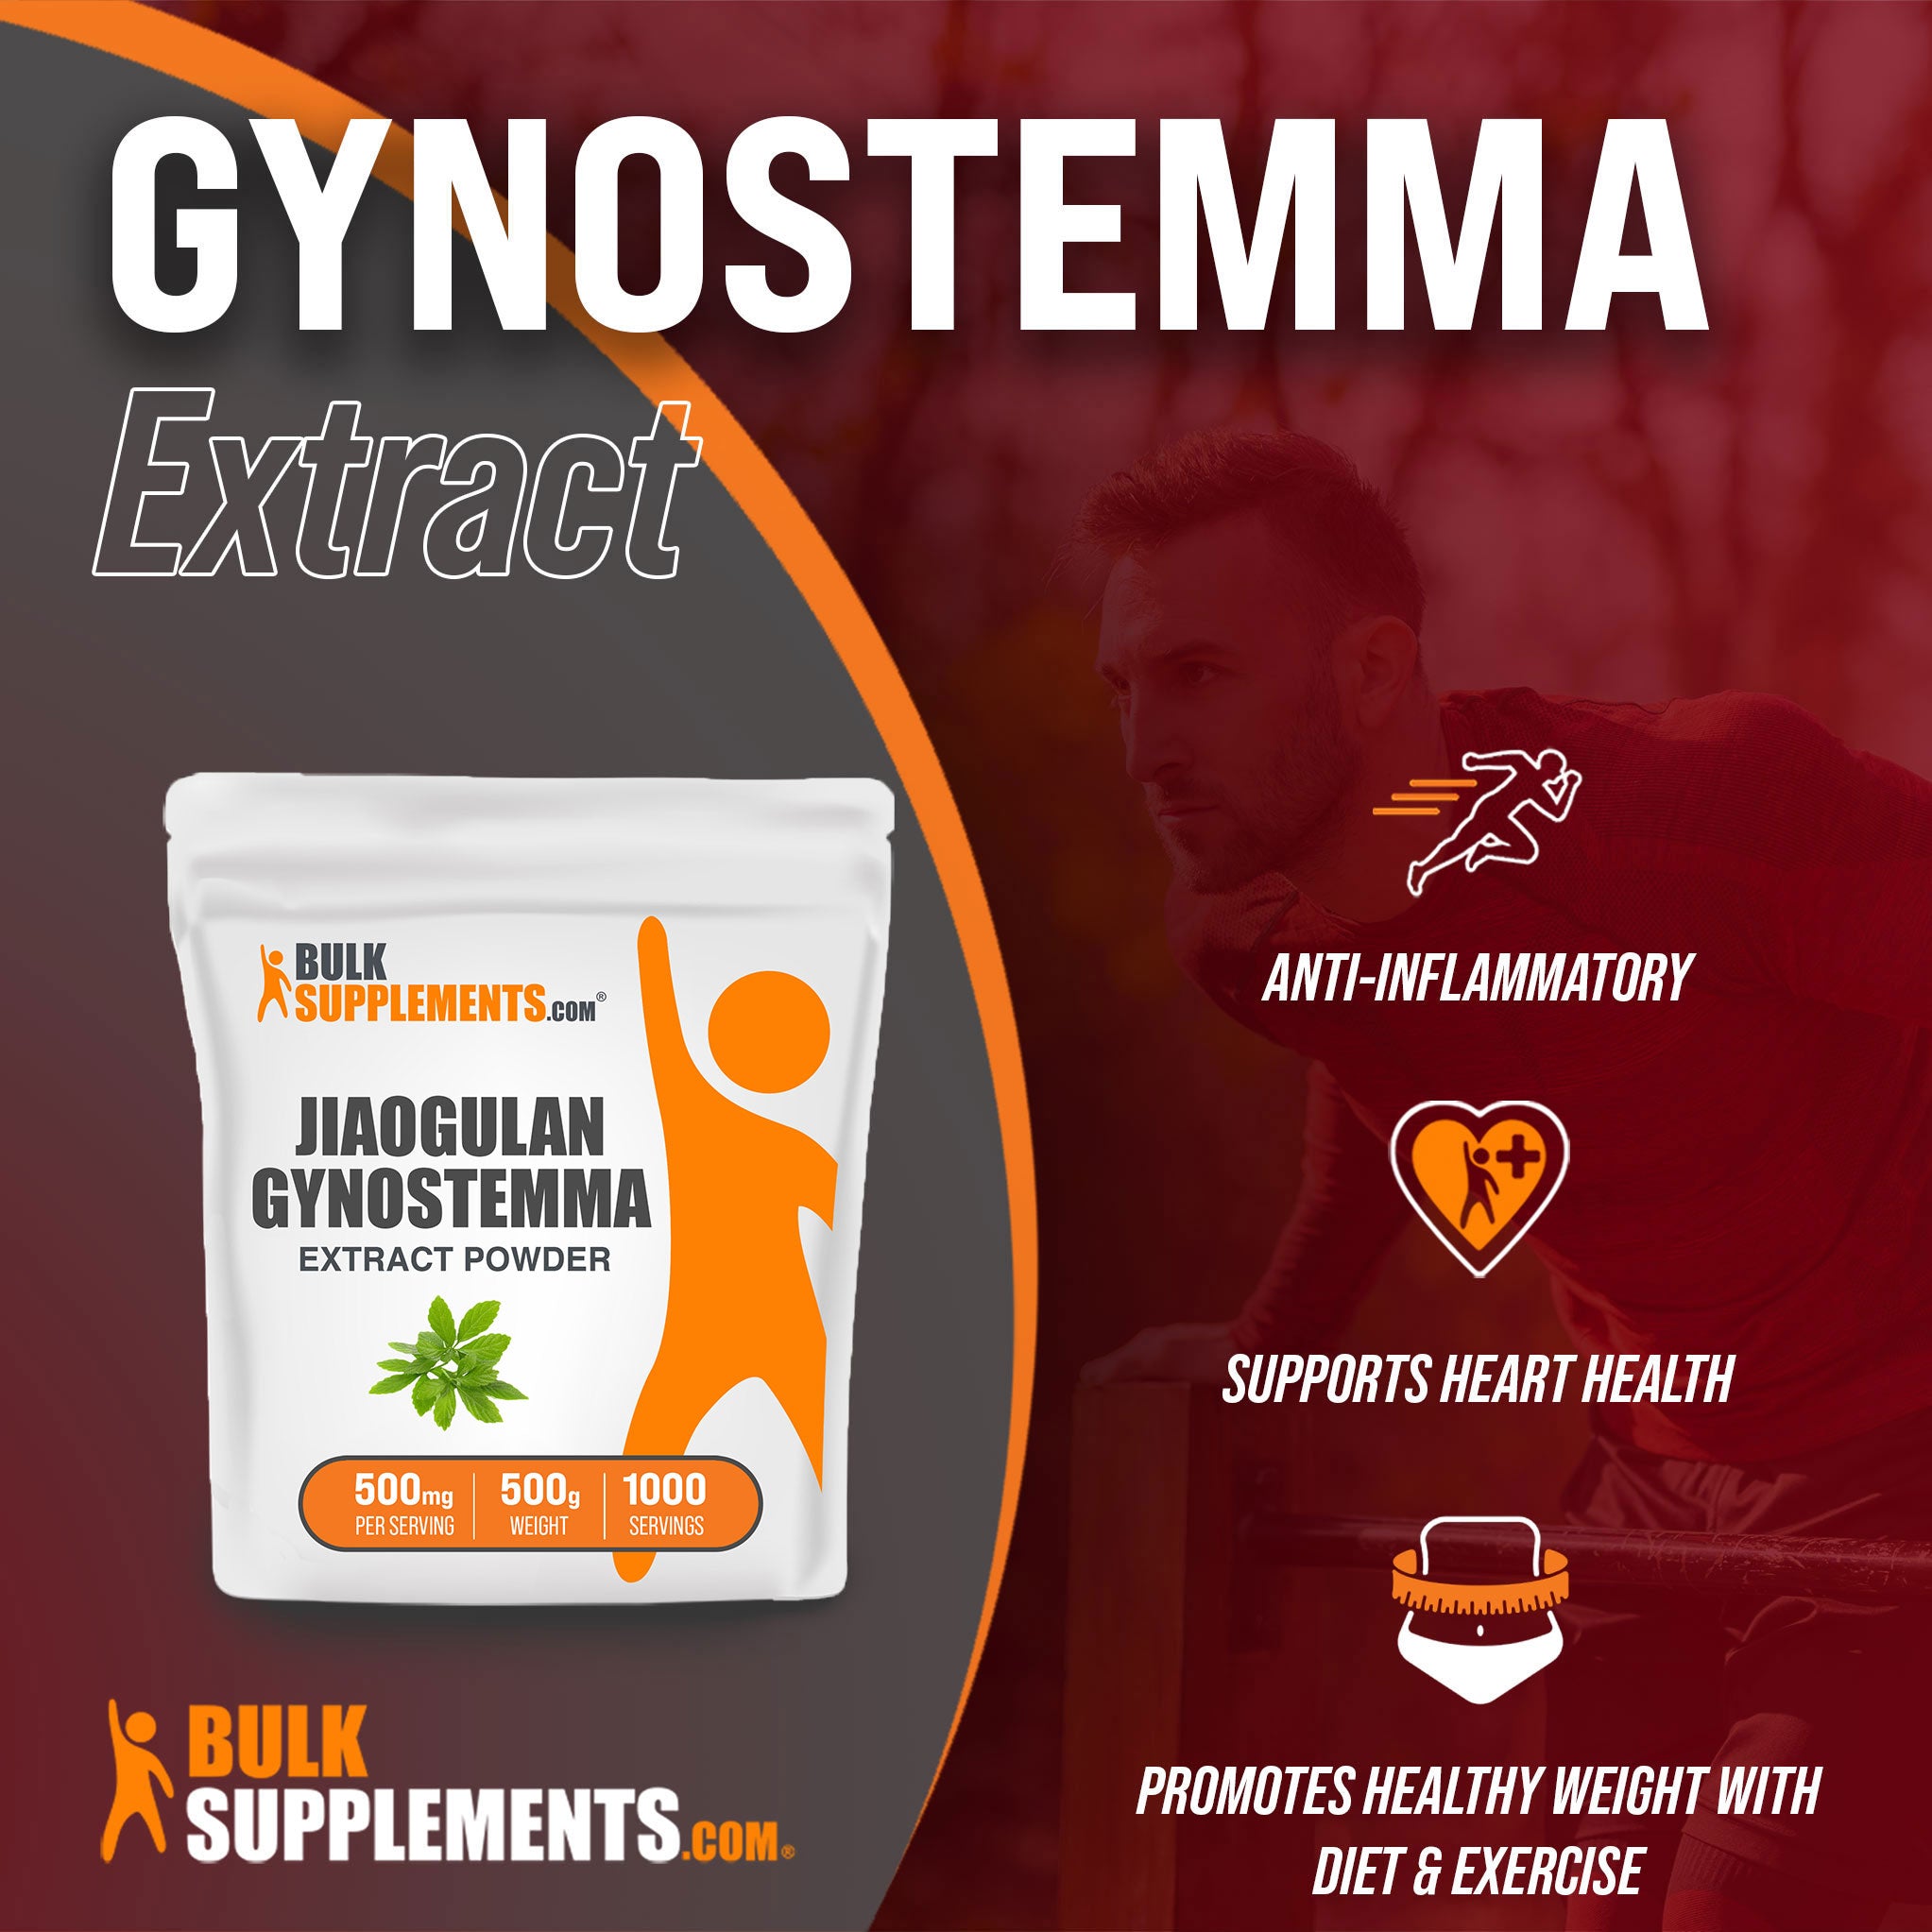 Benefits of Gynostemma Extract; anti-inflammatory, supports heart health, promotes healthy weight with diet and exercise